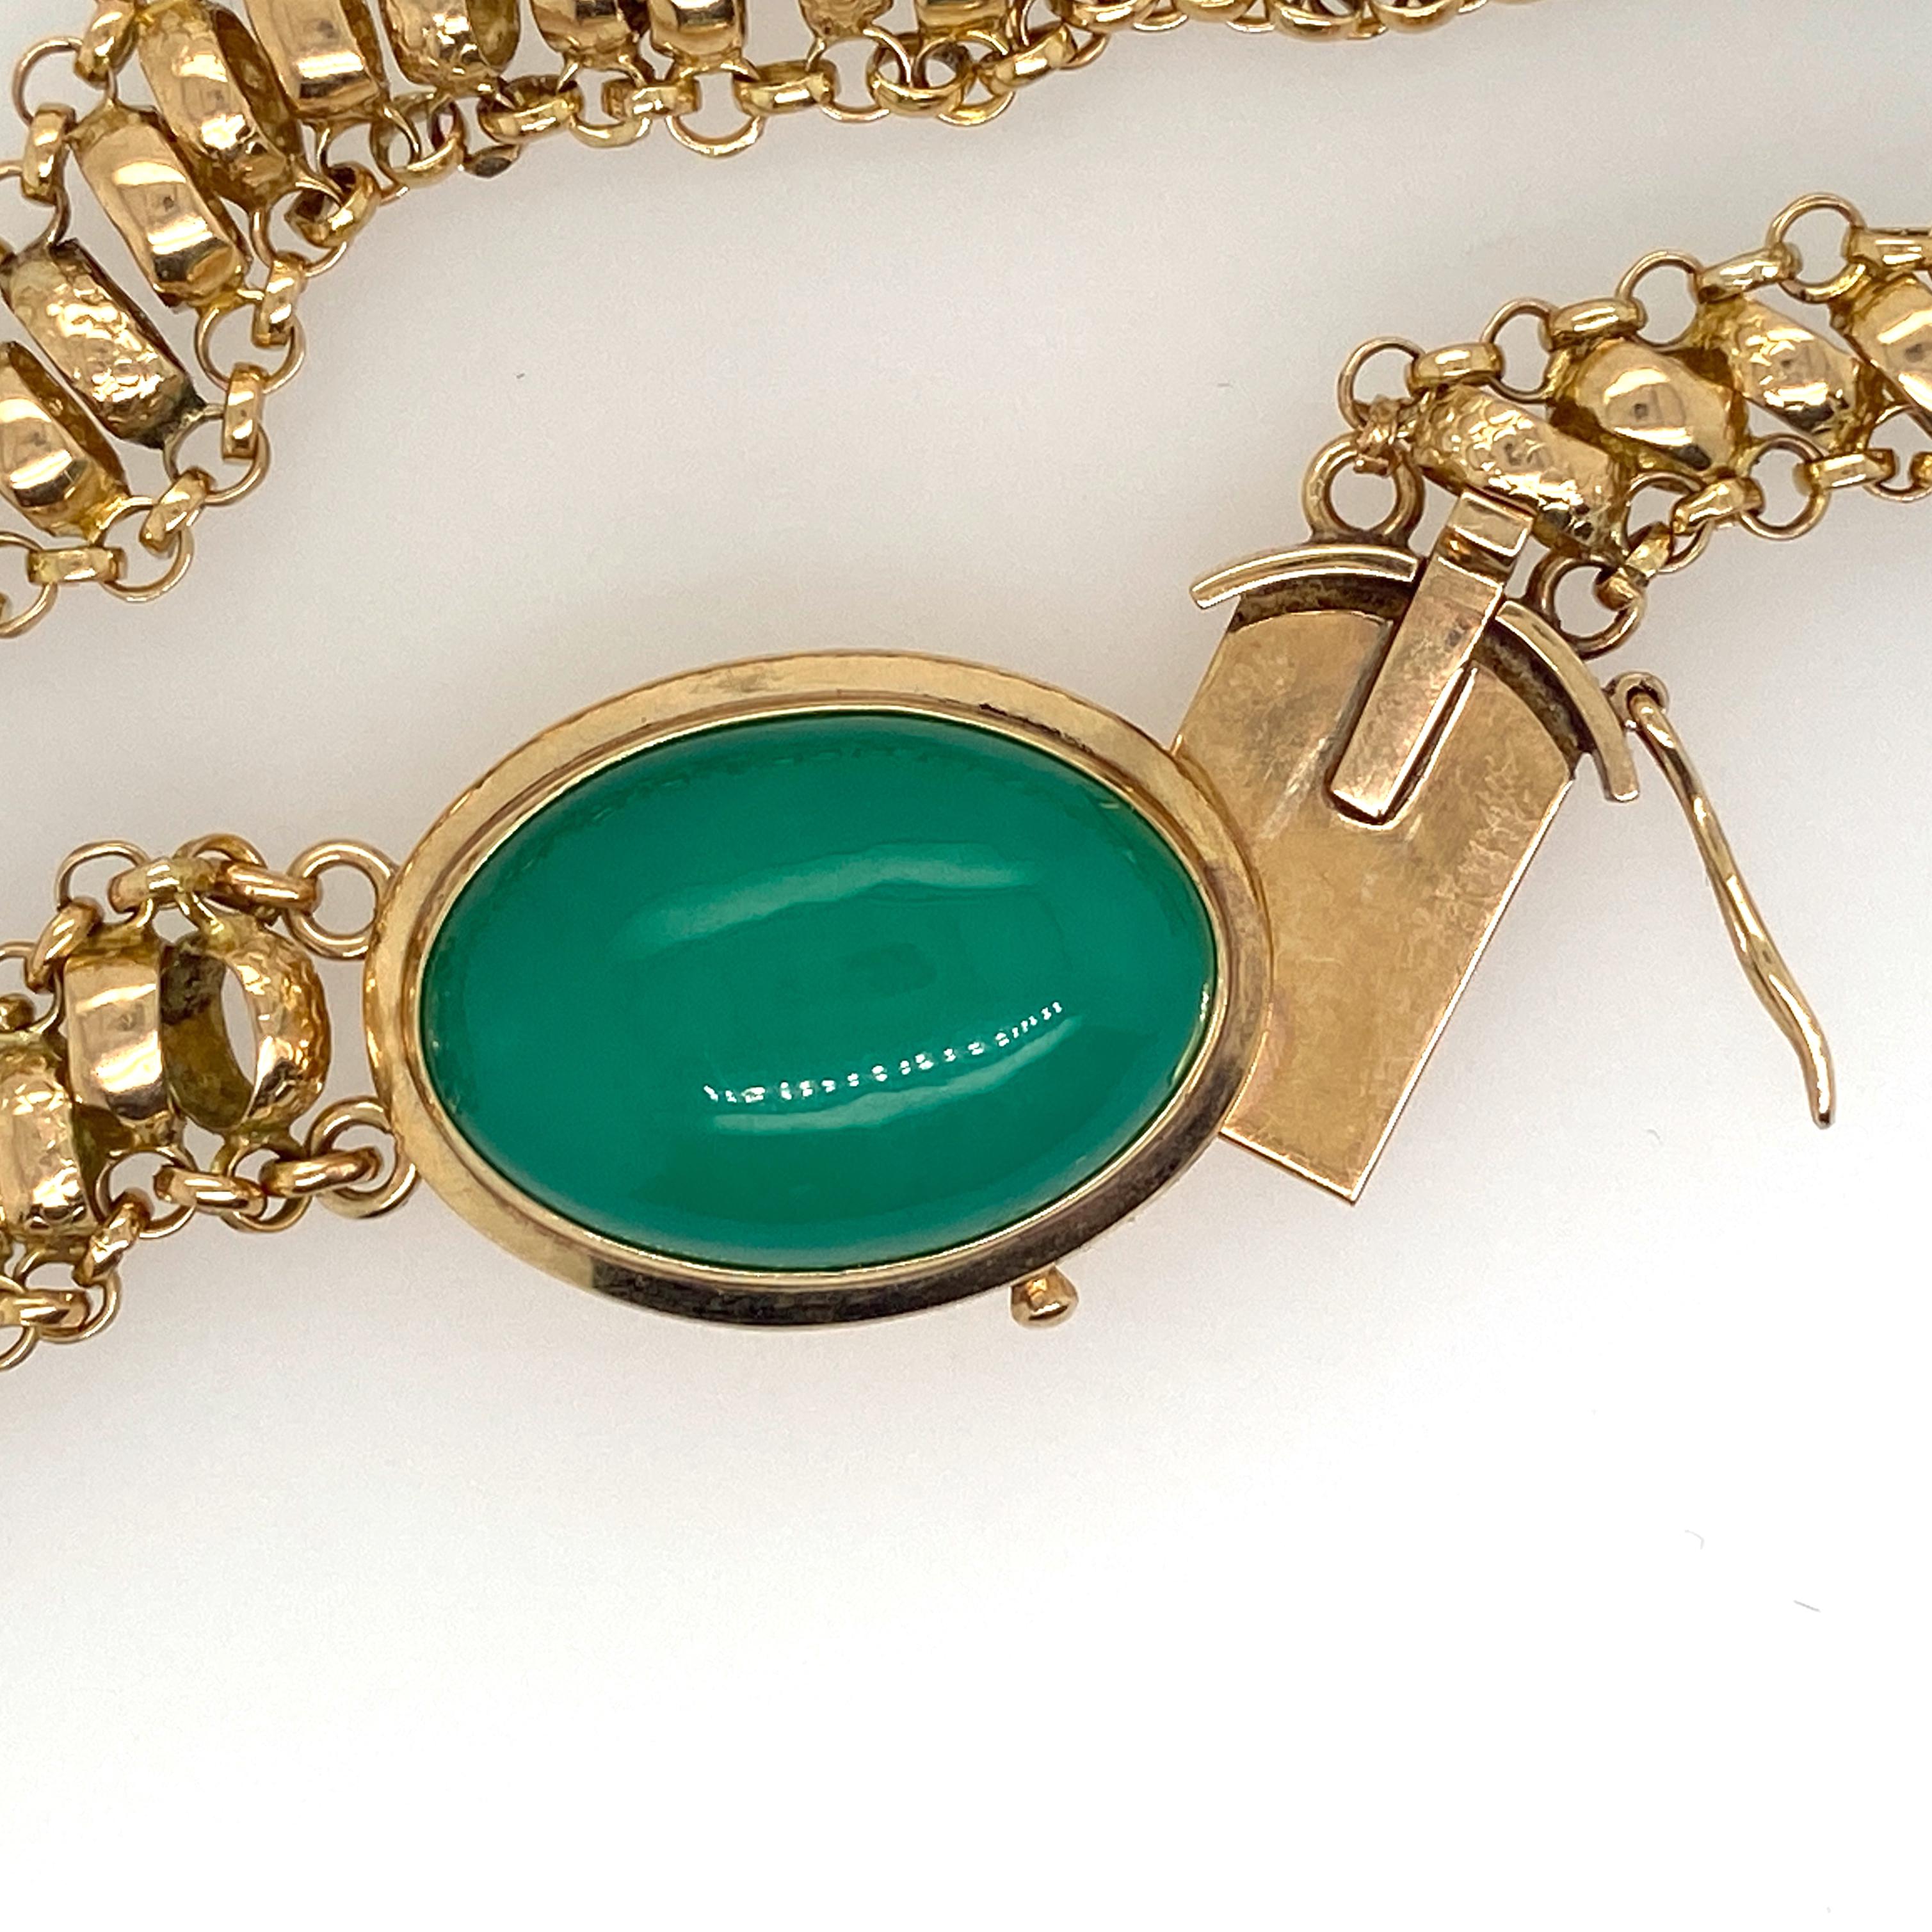 Antique Book Chain Bracelet in 18 Karat Yellow Gold with Chrysoprase Box Clasp In Excellent Condition For Sale In Sherman Oaks, CA